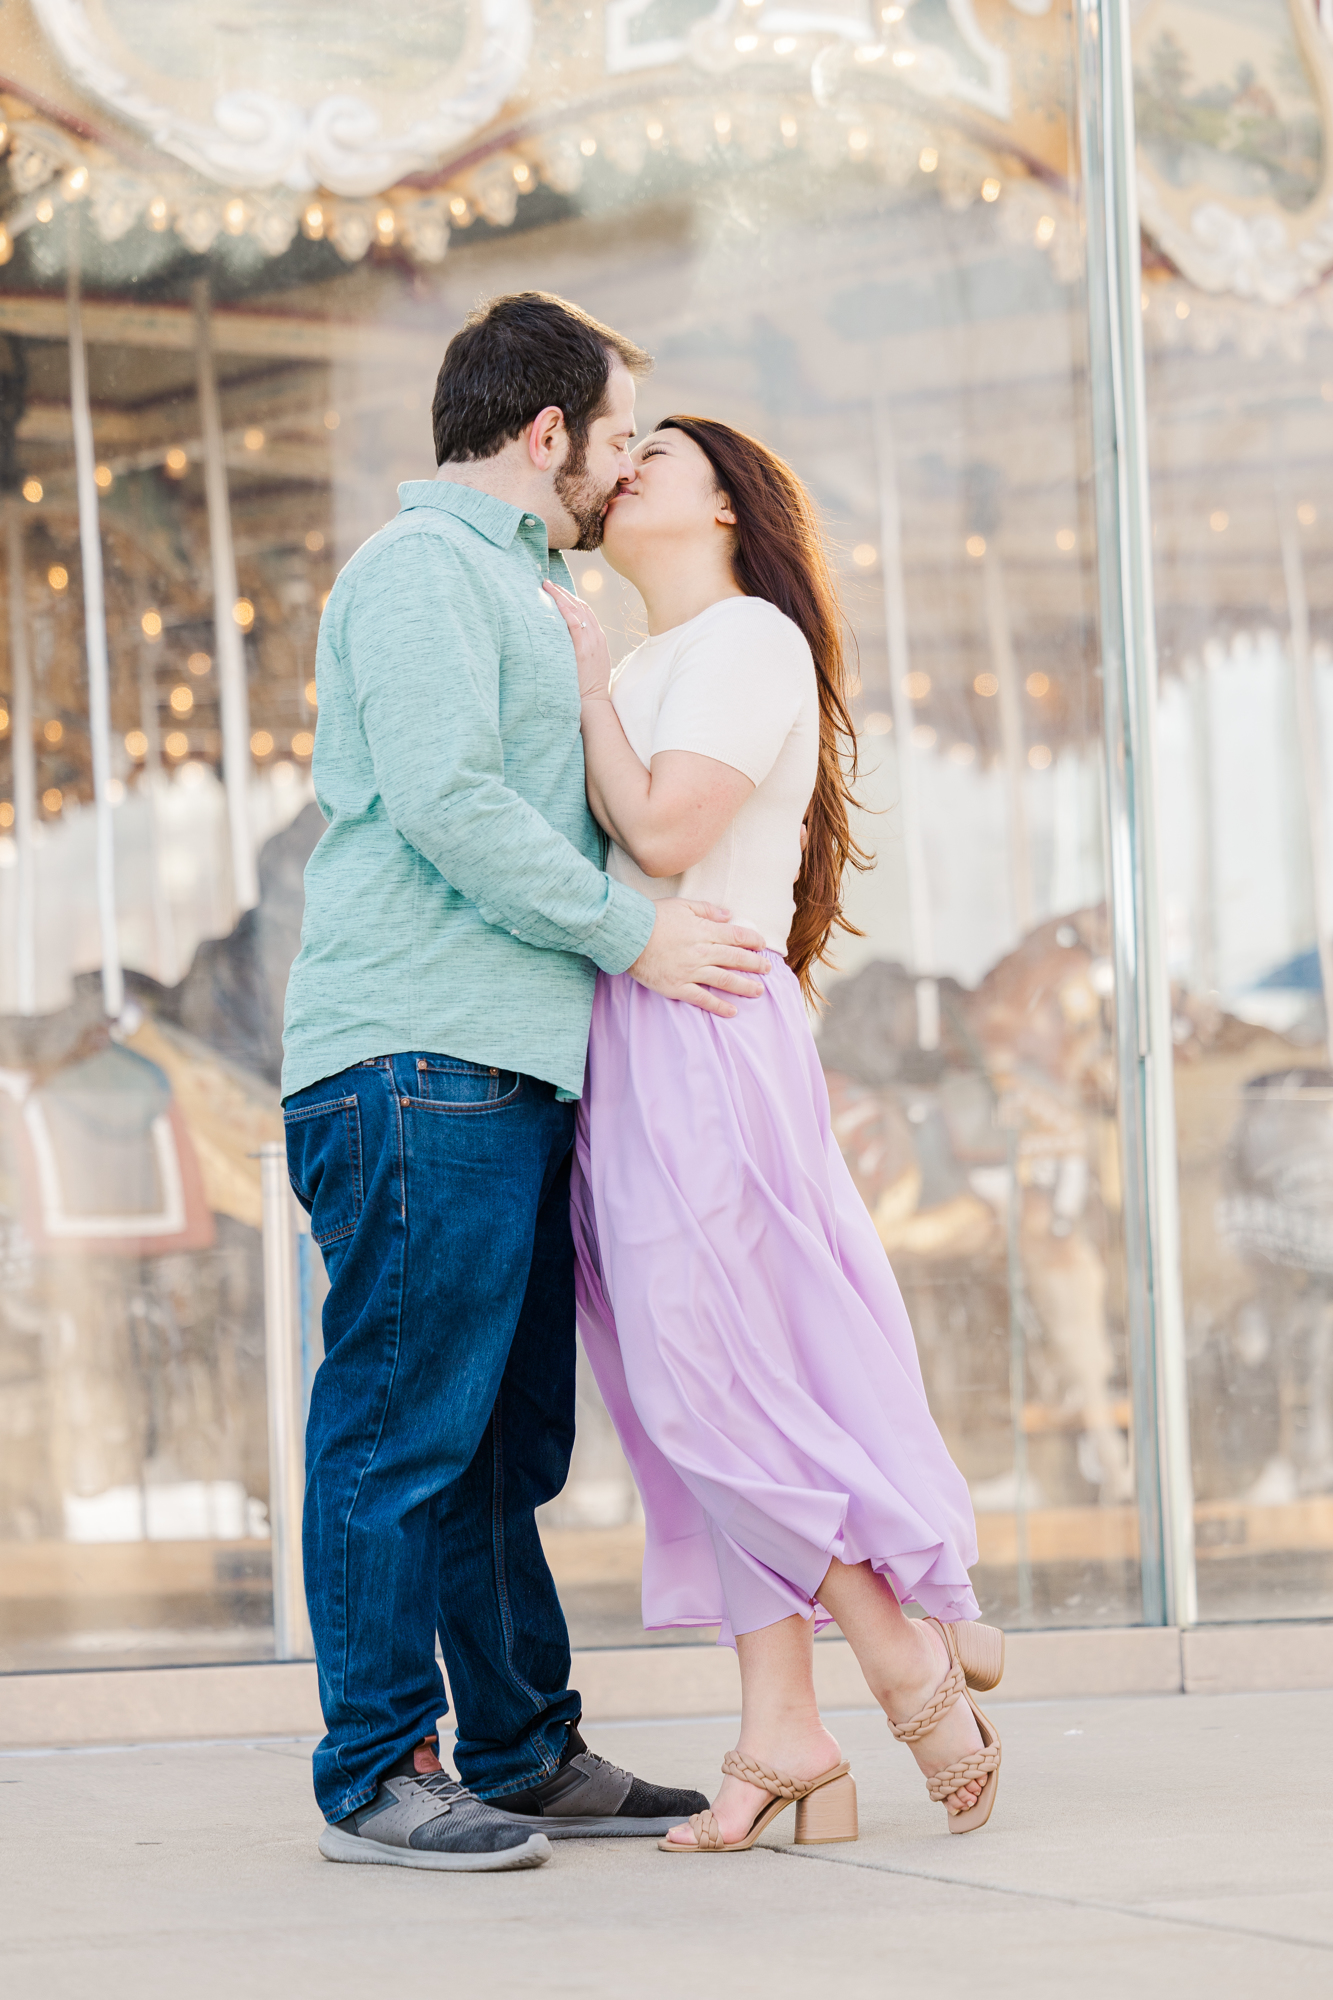 Enchanting Brooklyn Bridge Engagement Photography with Matching Outfits